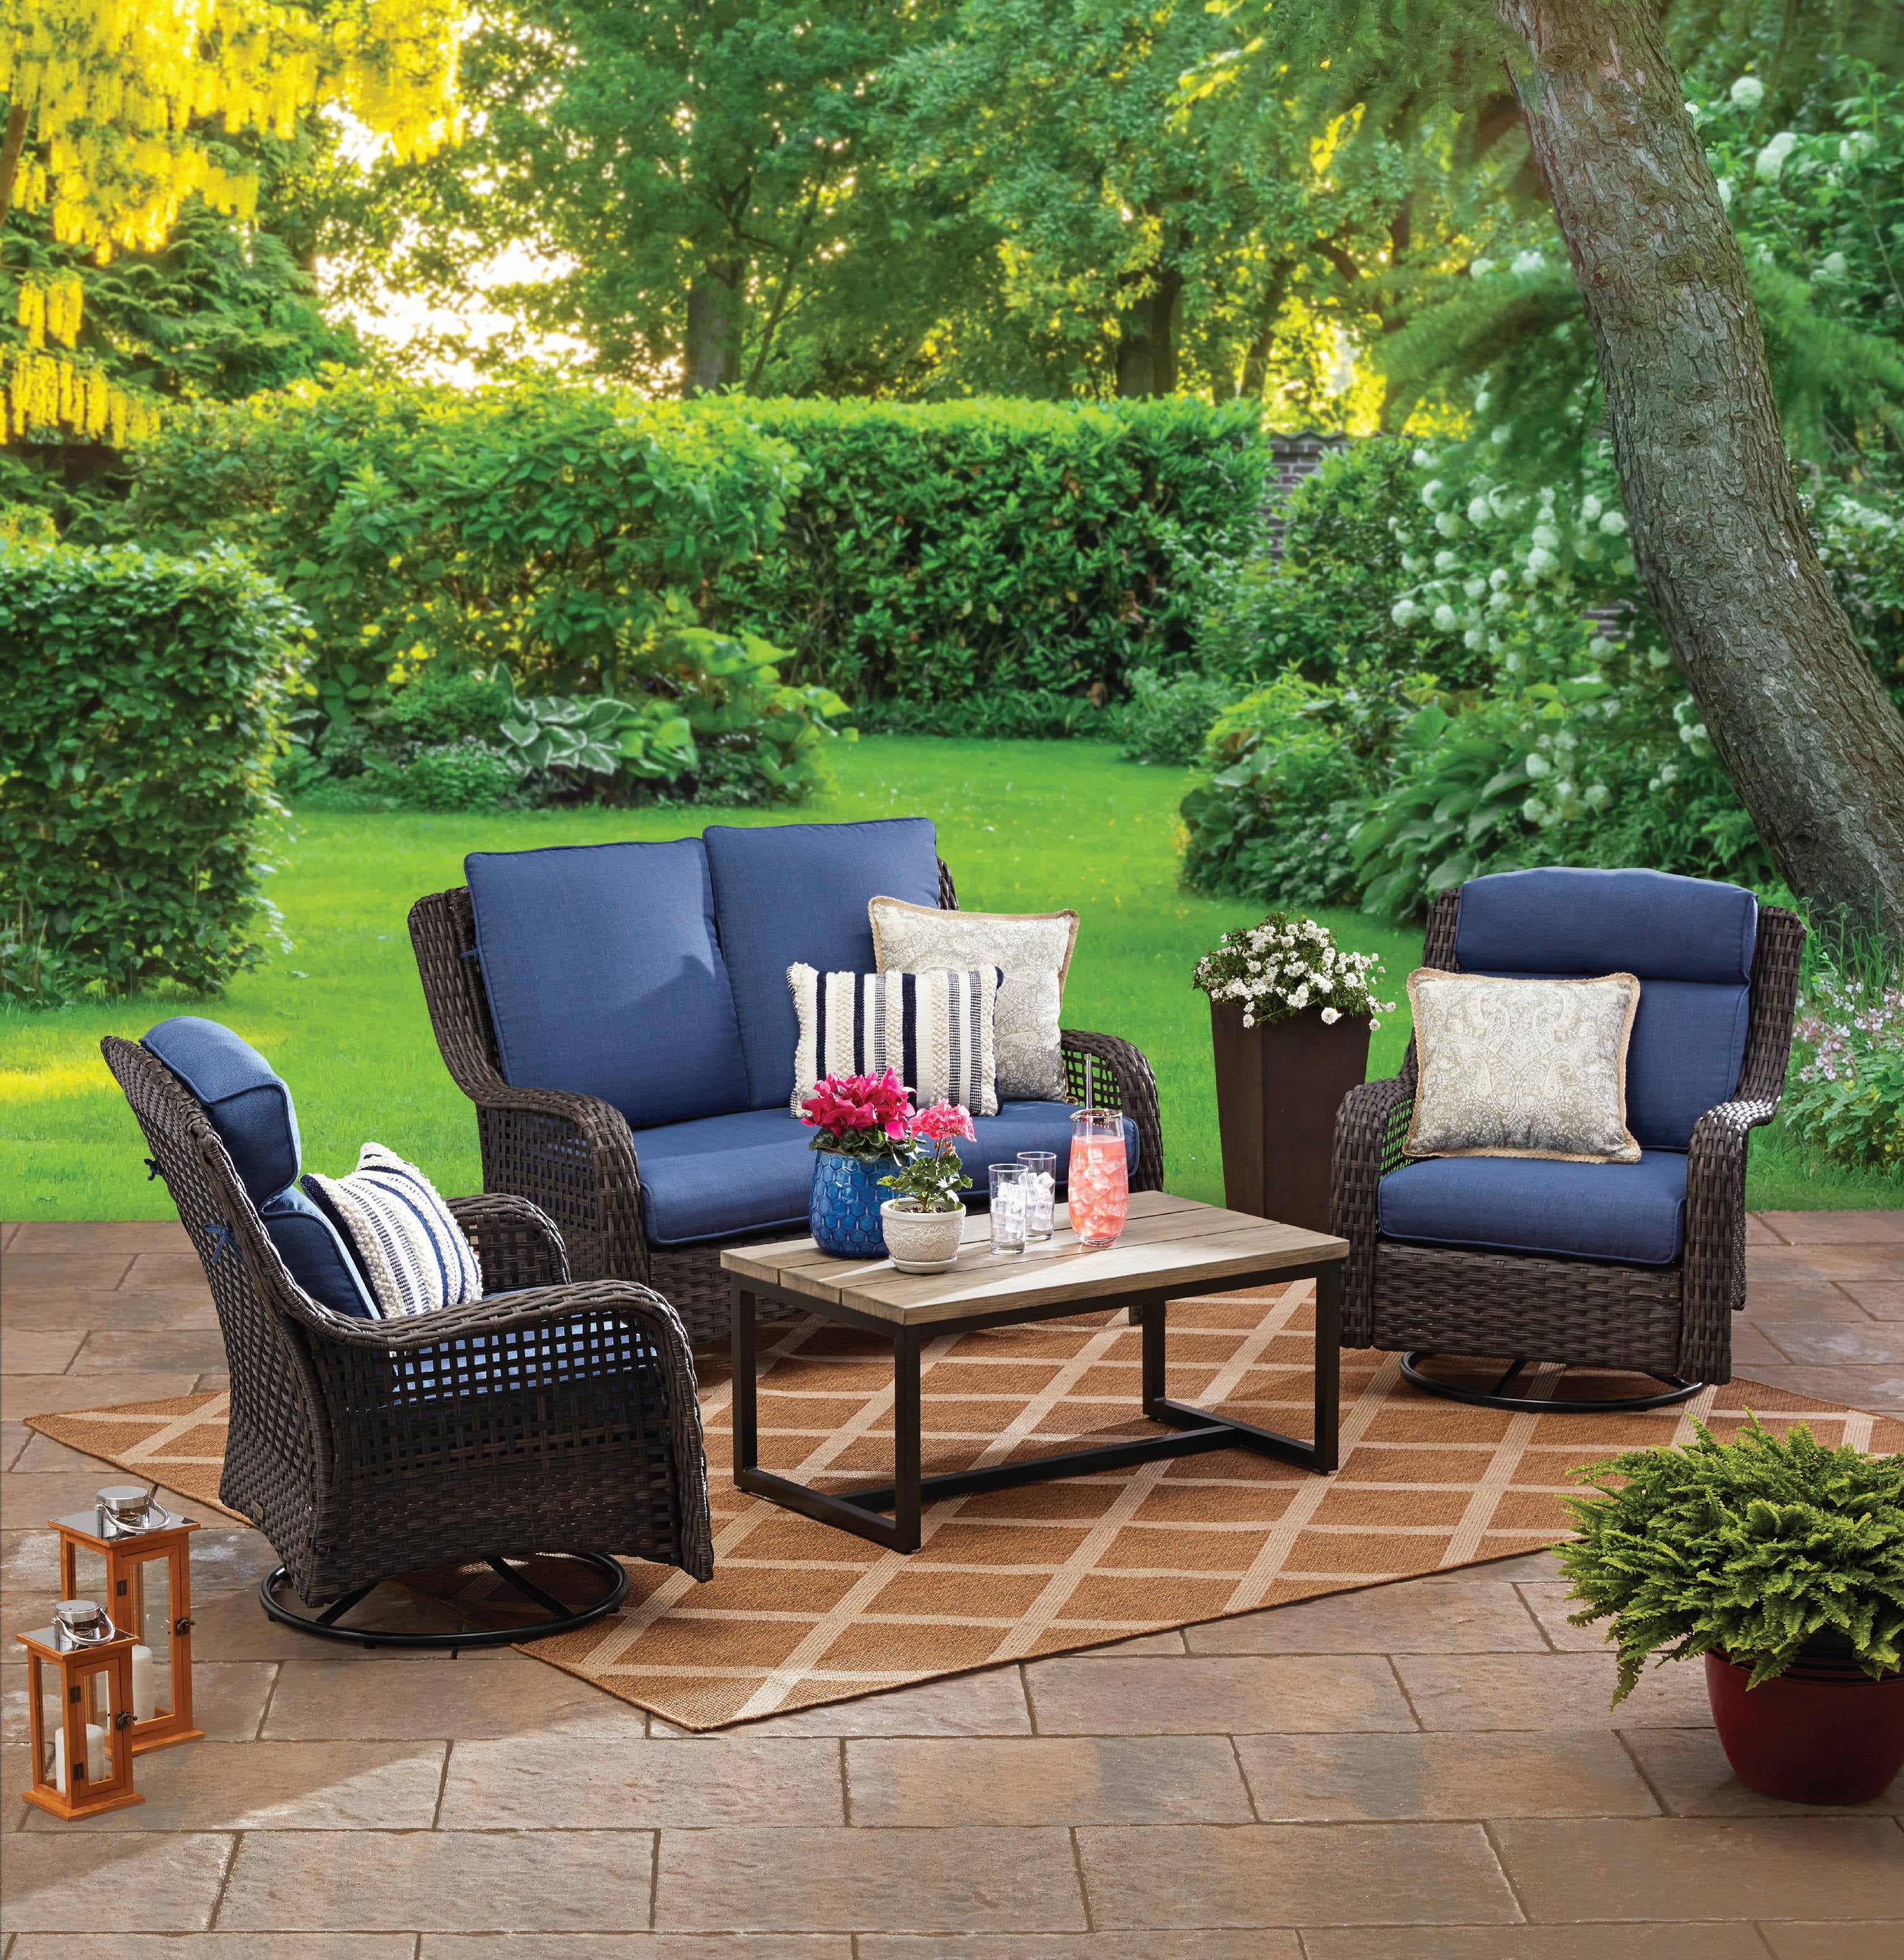 4 Piece Outdoor Wicker Swivel Chair, Patio Sets With Swivel Rocking Chairs